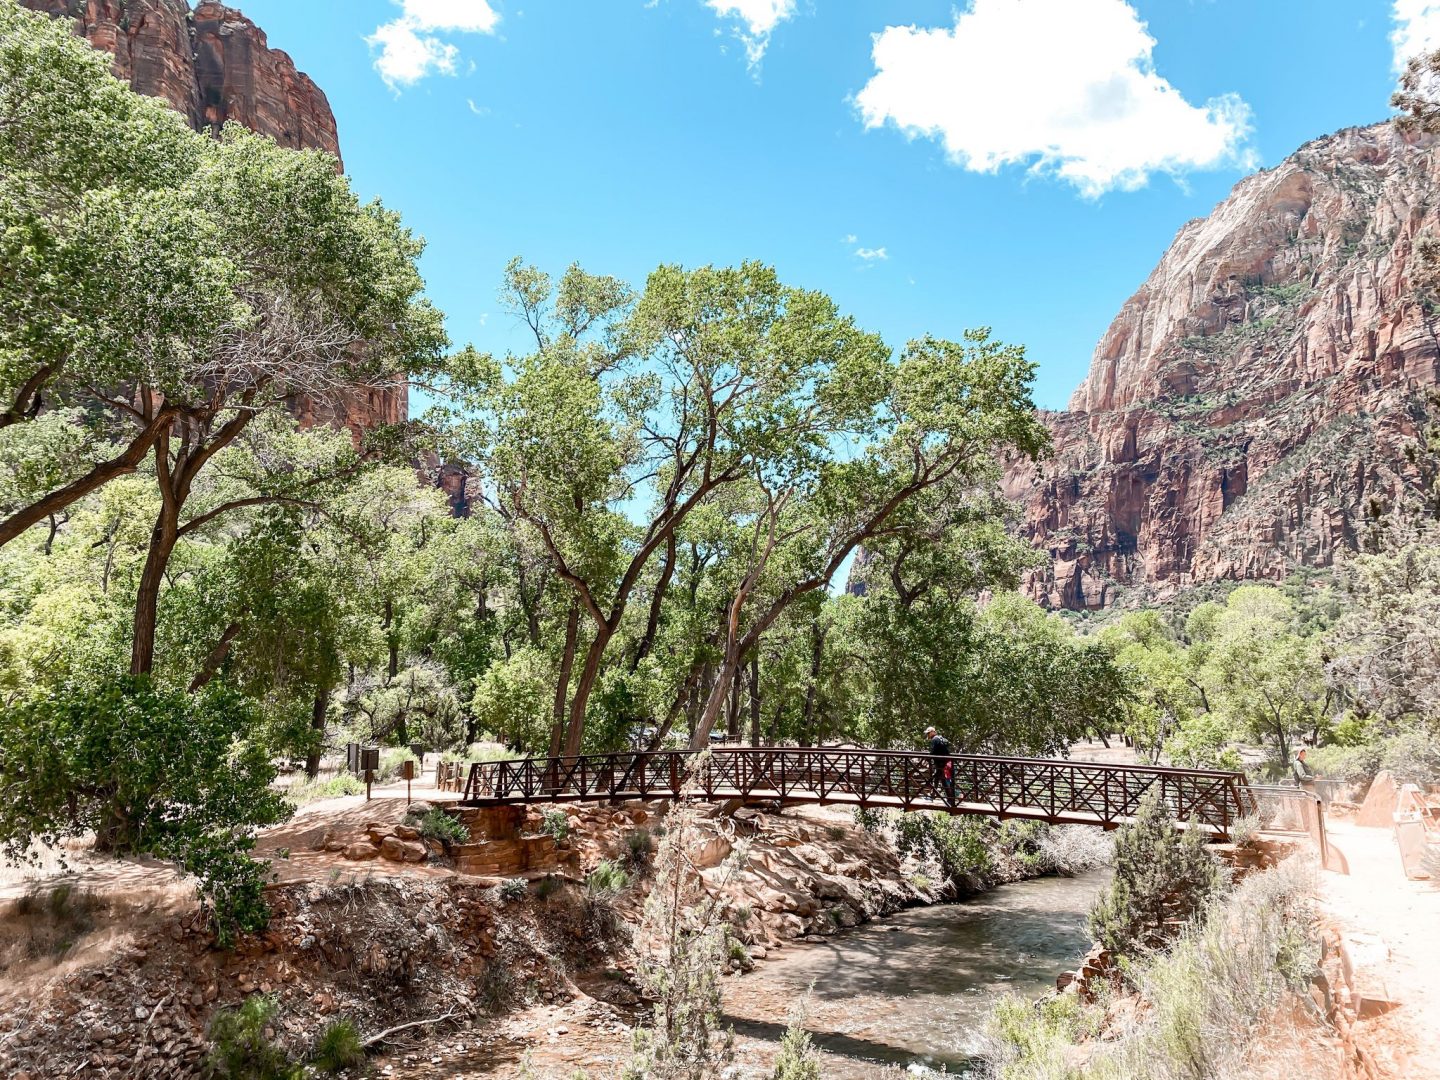 Zion National Park & Hiking The Narrows